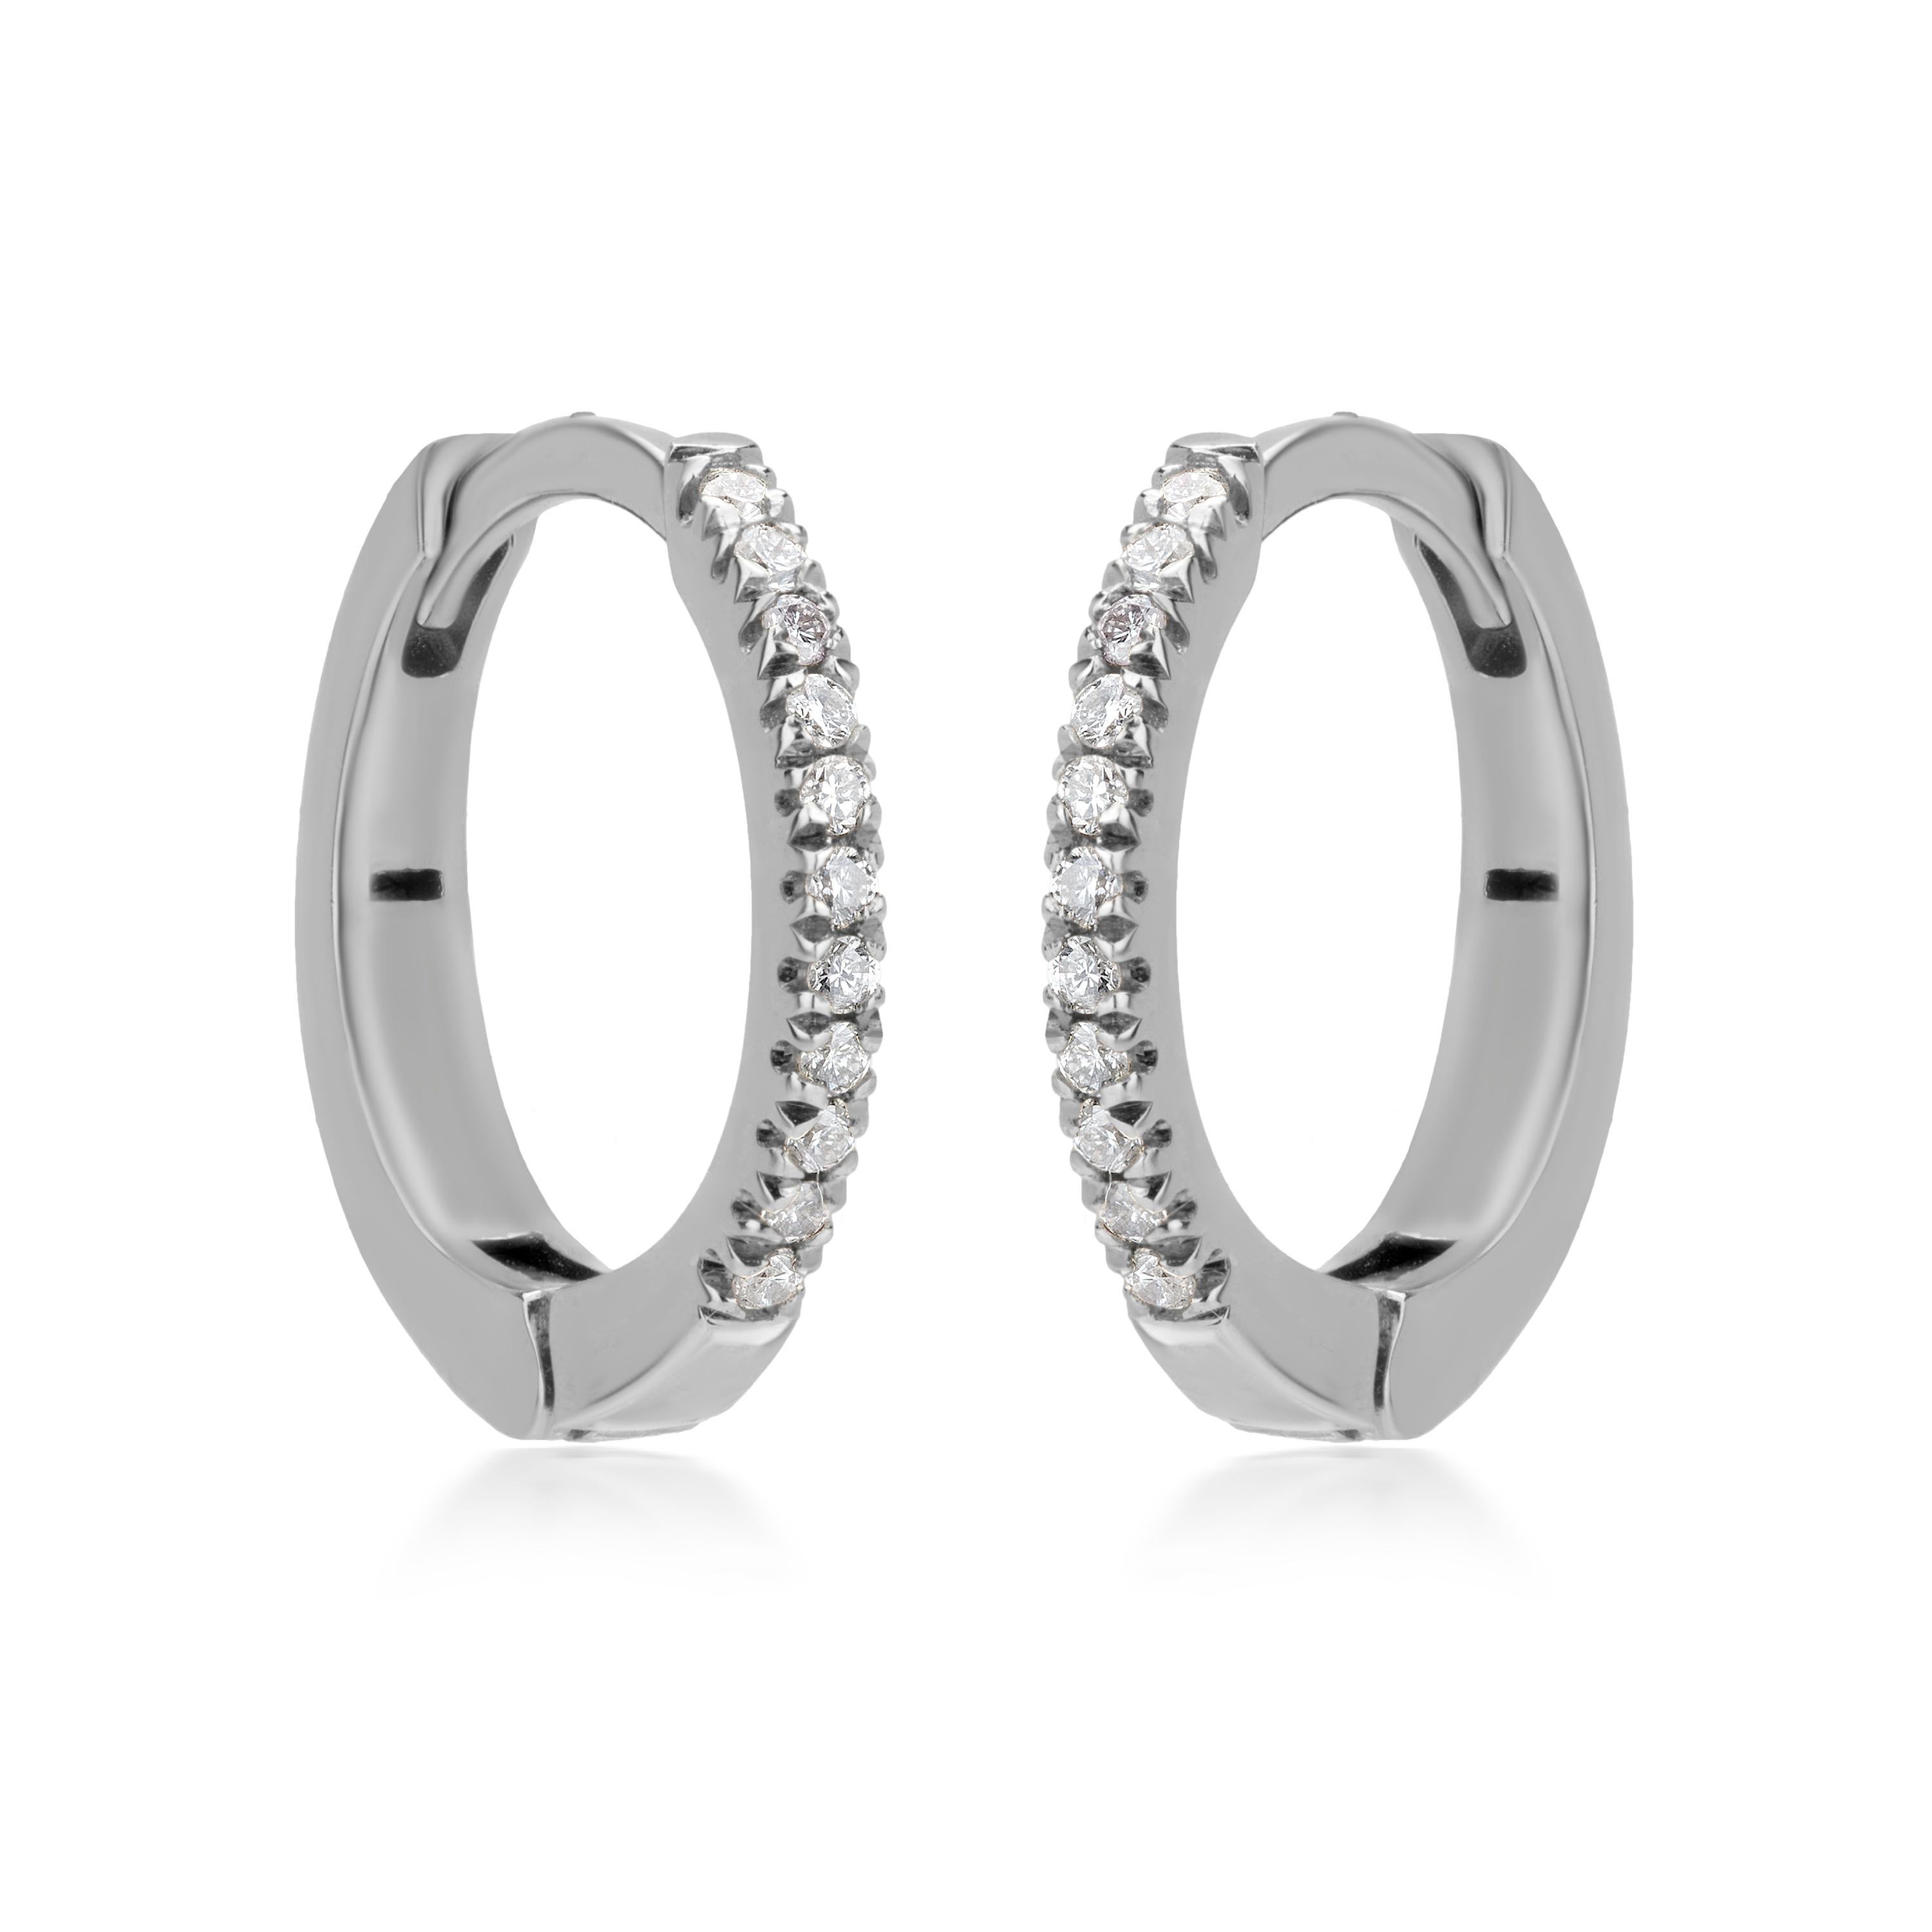 22 Round full-cut White Diamonds accentuate this Luxle hoop style earring manifested on an 18K White Gold body. Set in a micro pave, the diamonds totally weigh 0.073 Cts. The diamonds are I1 in clarity, and GH in color. This basic and simply elegant